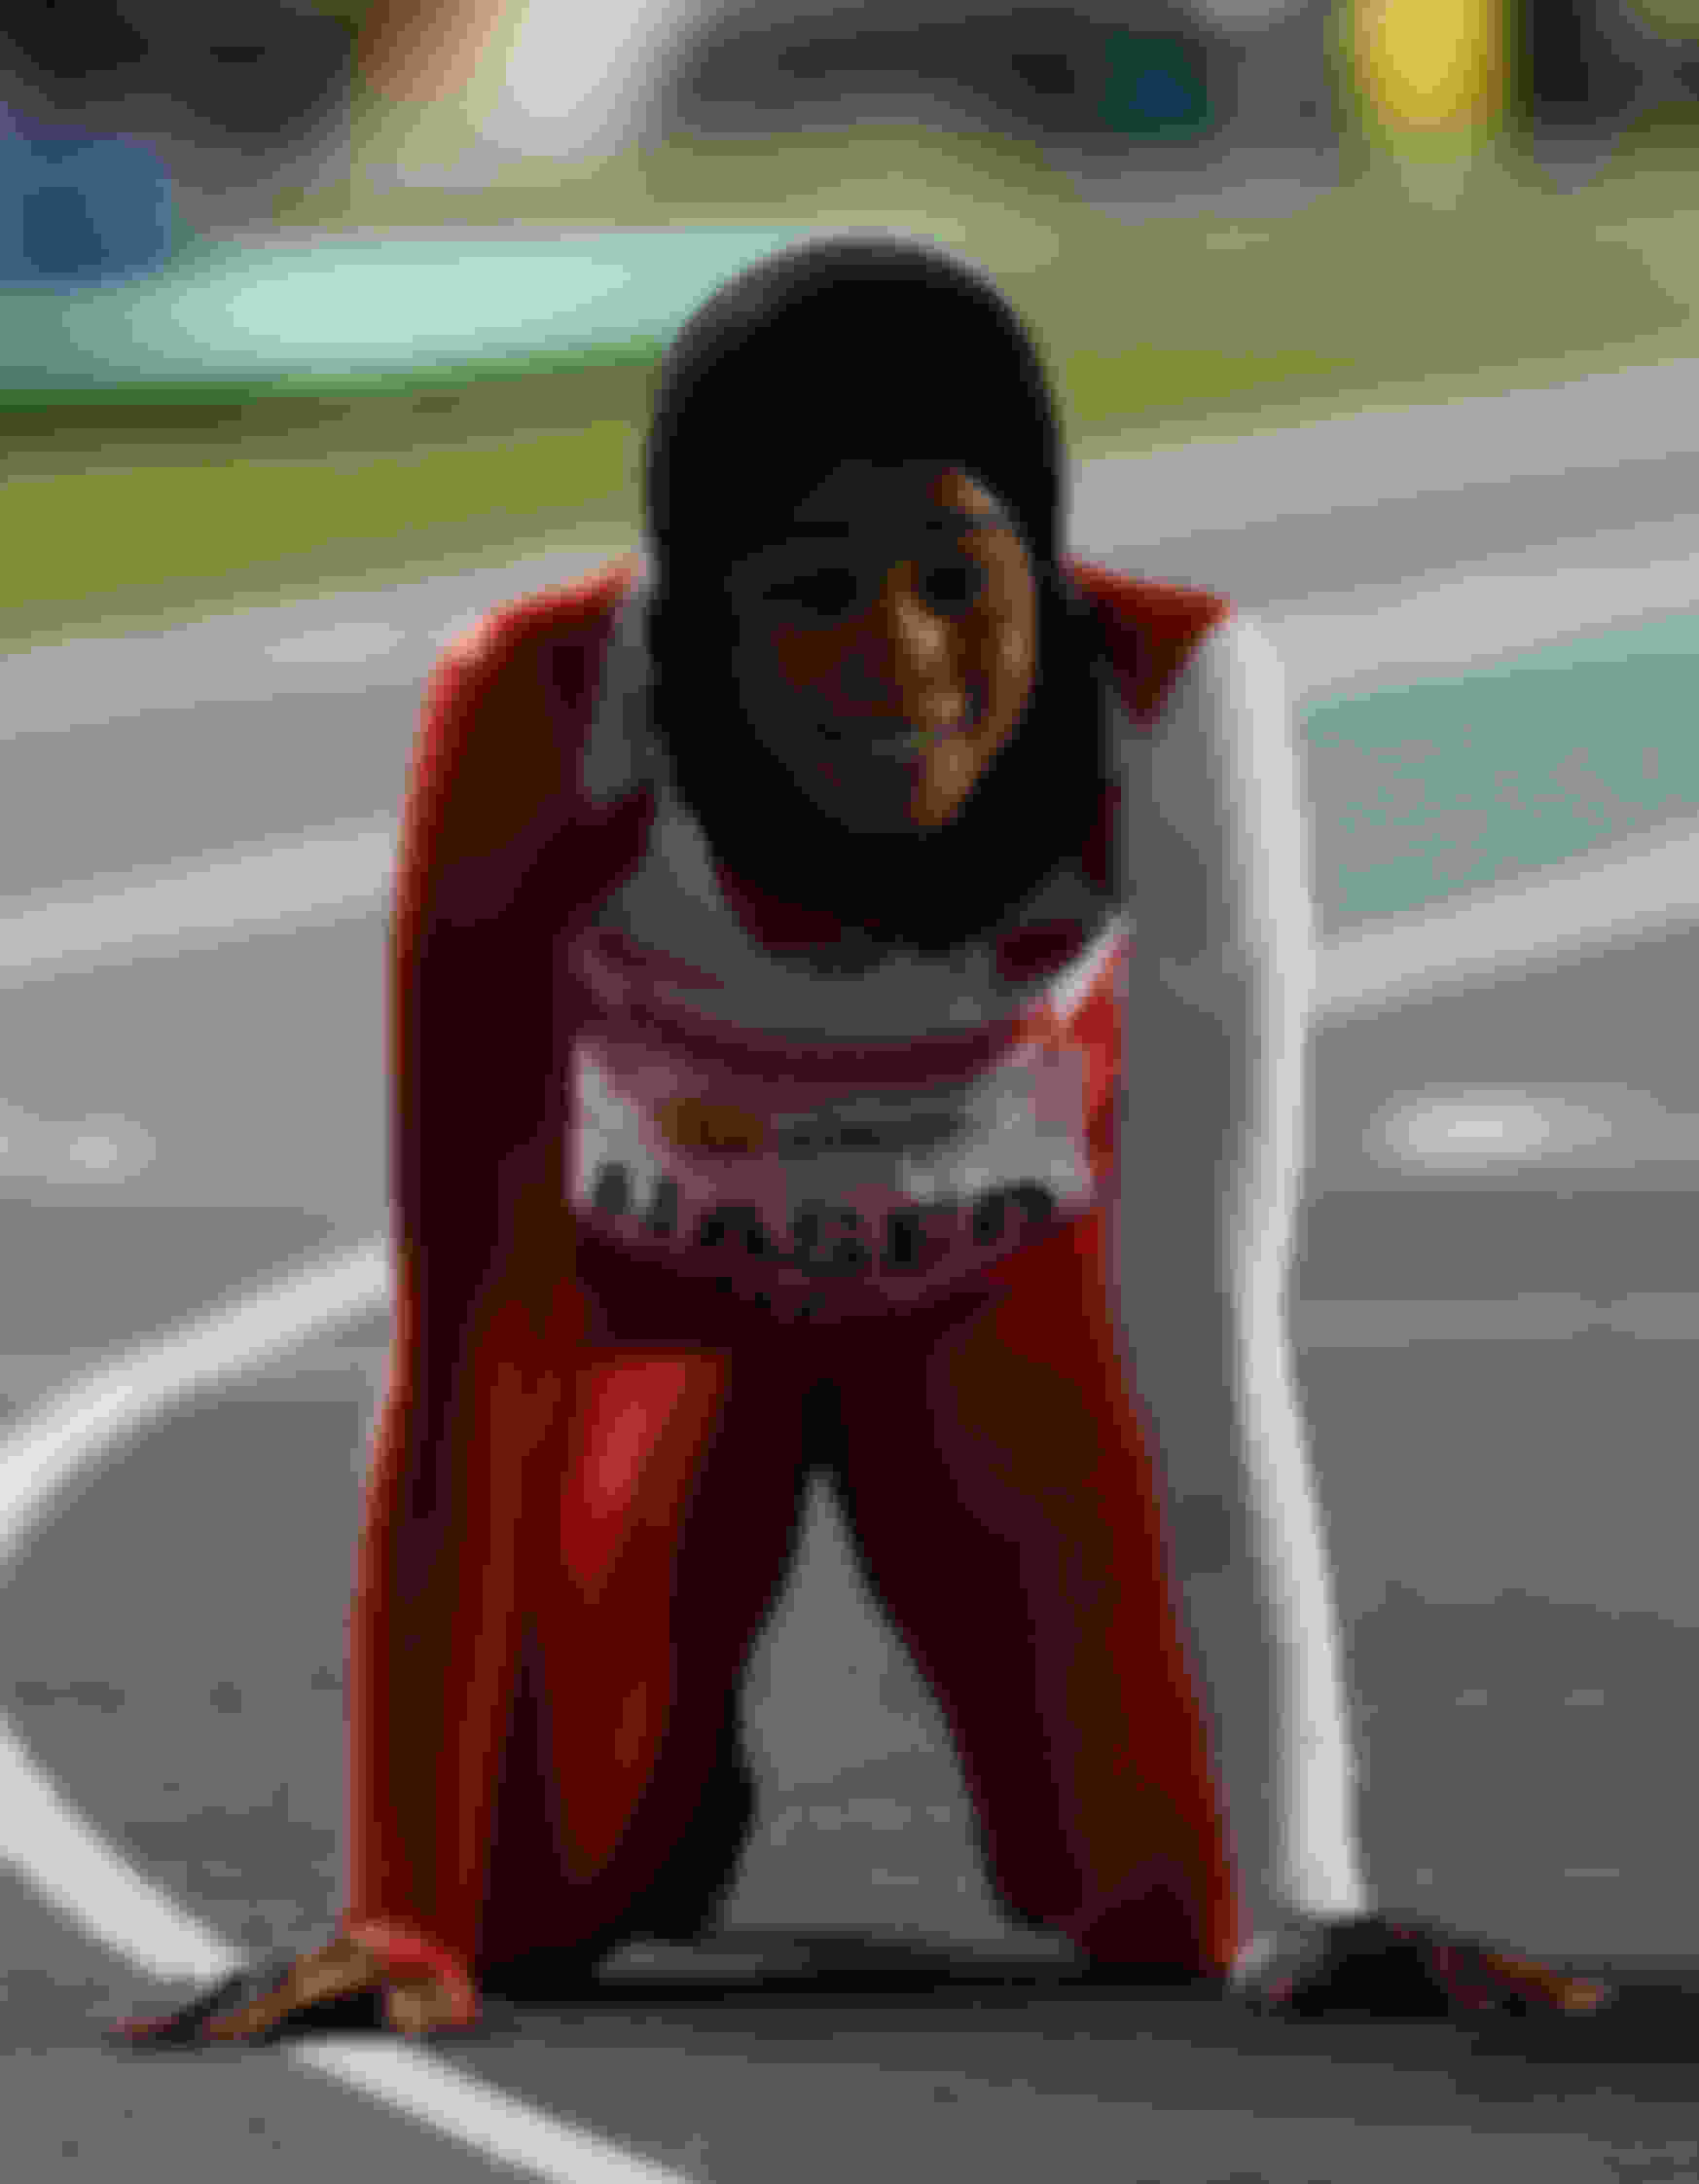 Salwa Eid Naser of Bahrain wearing a hijab after winning the Girls 400m Final at the IAAF World Youth Championships in 2015 